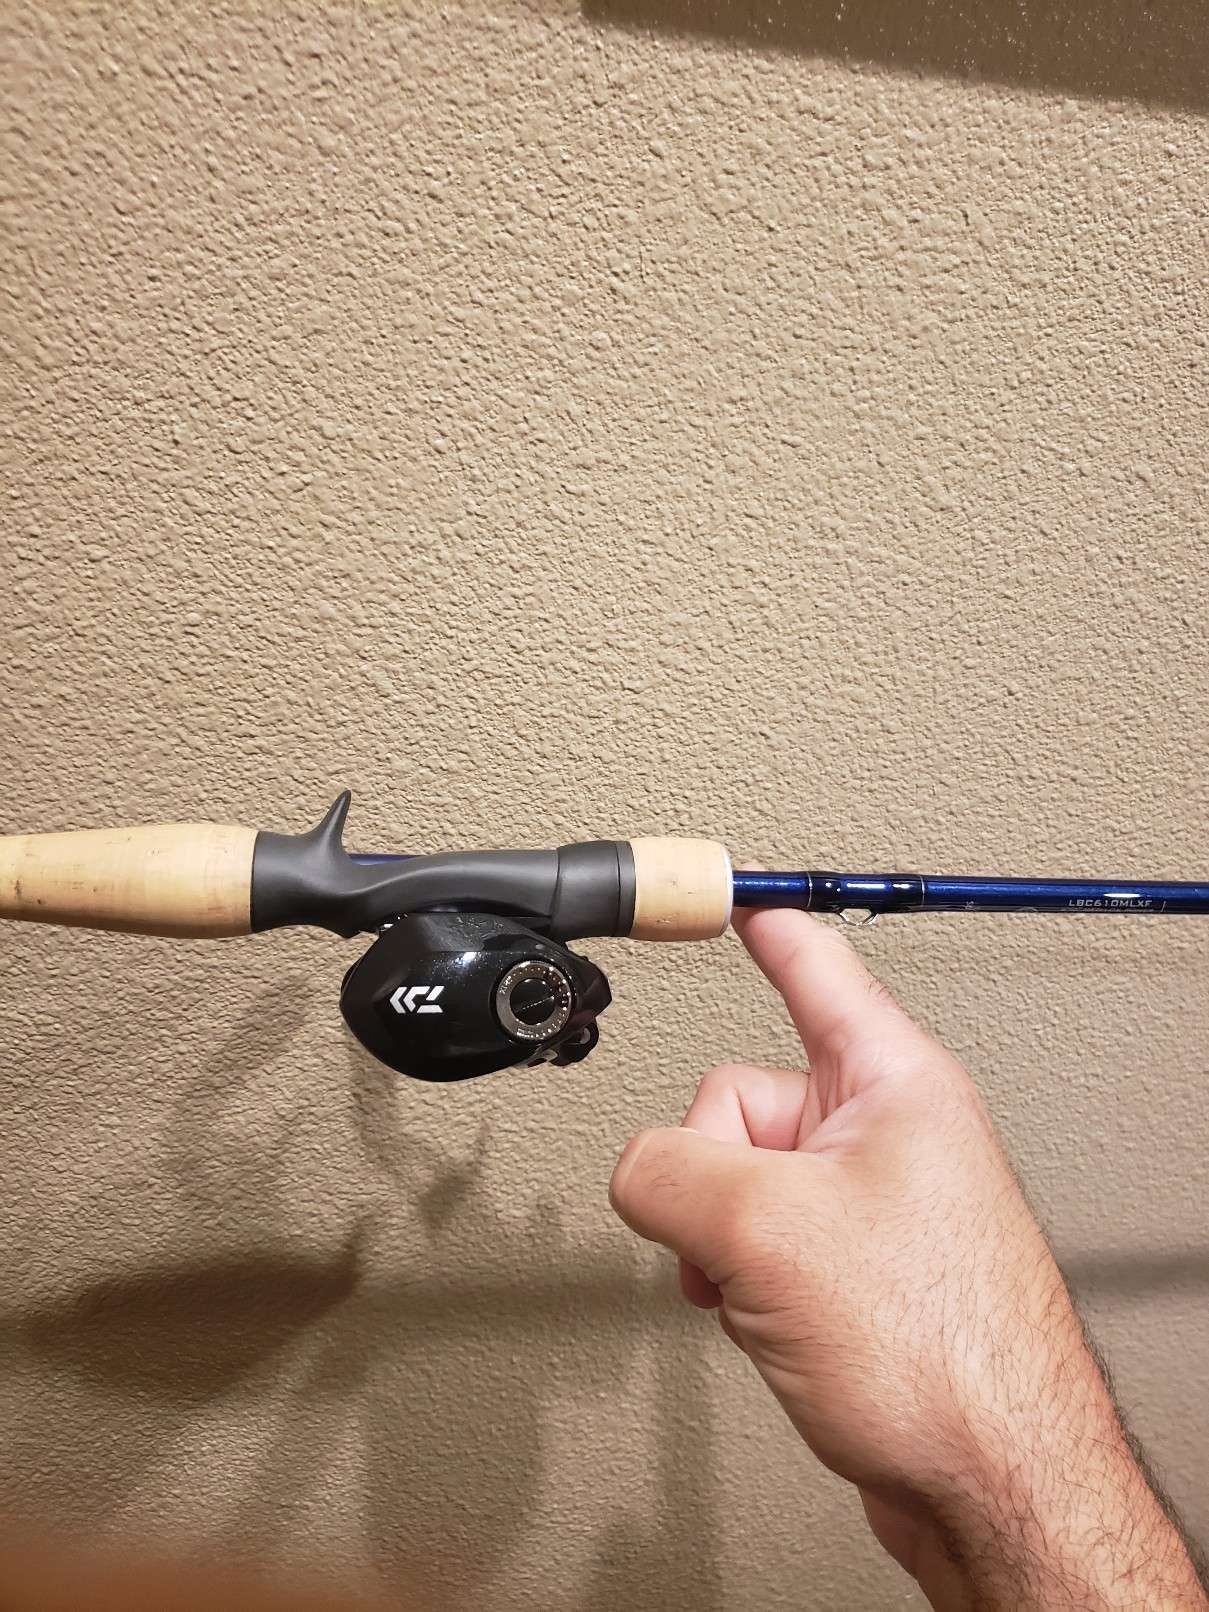 1/4 oz Jig Rod - Fishing Rods, Reels, Line, and Knots - Bass Fishing Forums